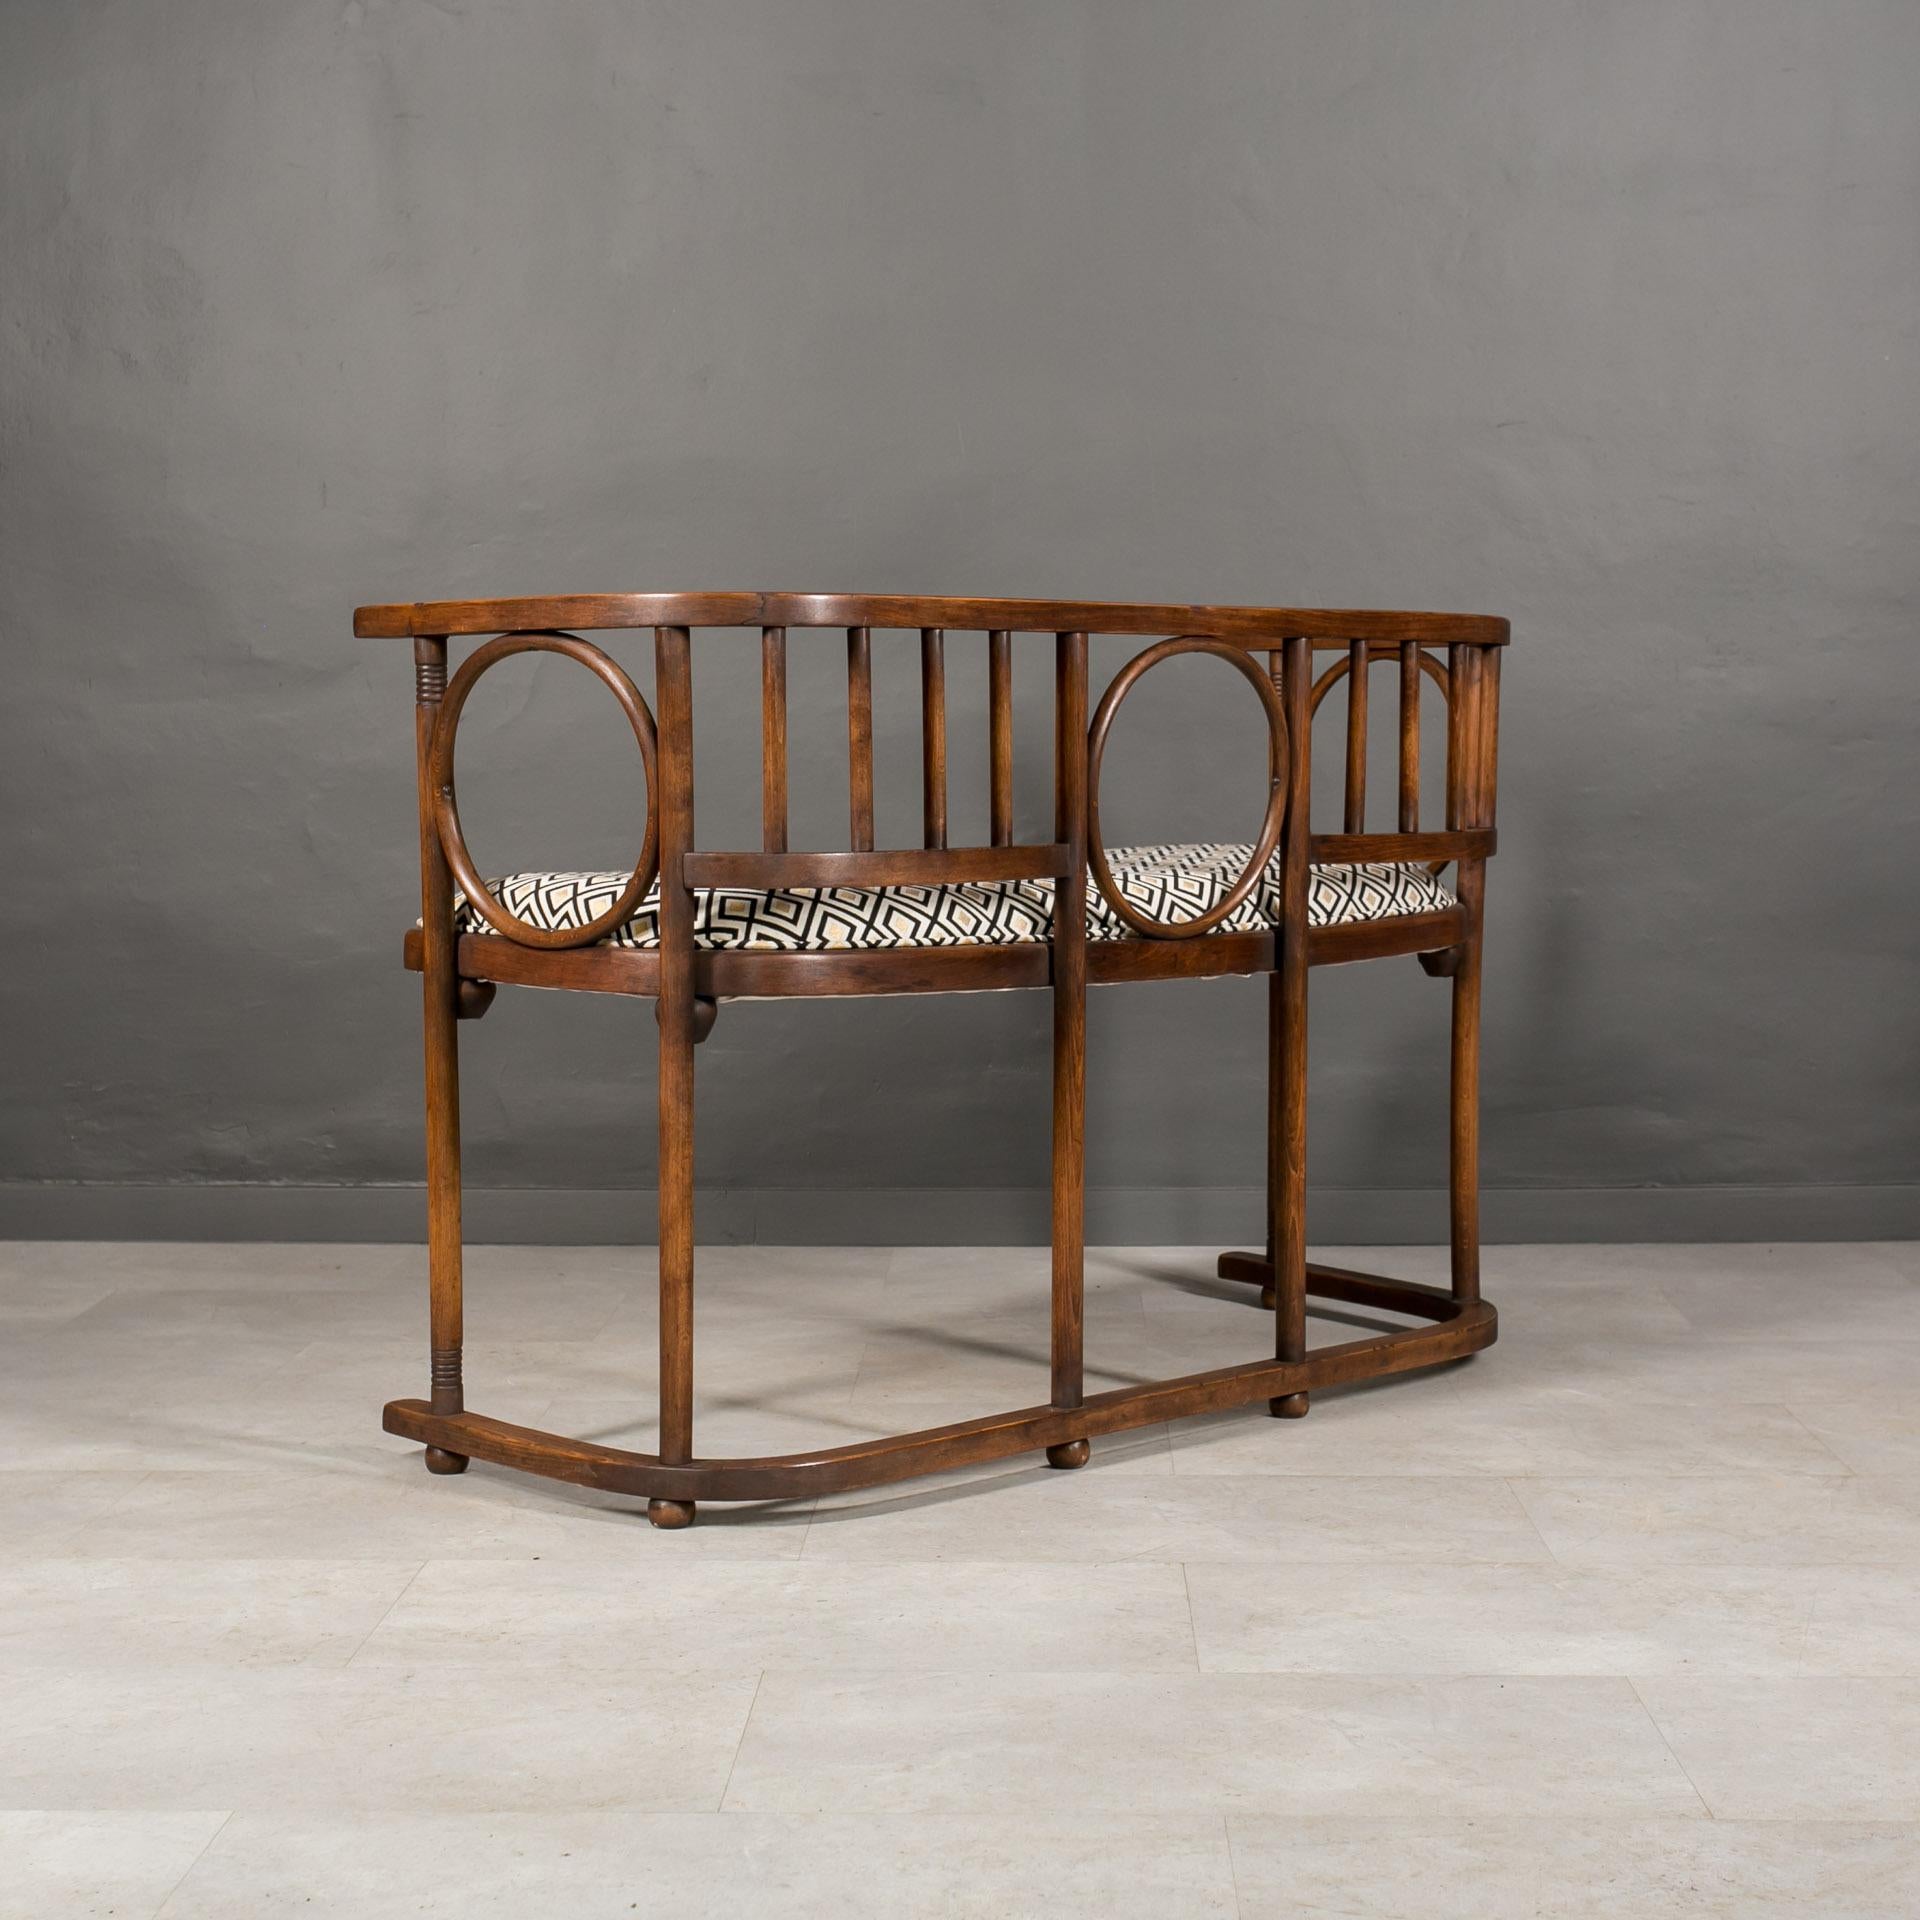 Beech Early 20th Century Bentwood Bench Settee by J. Hoffmann for Thonet - Mundus